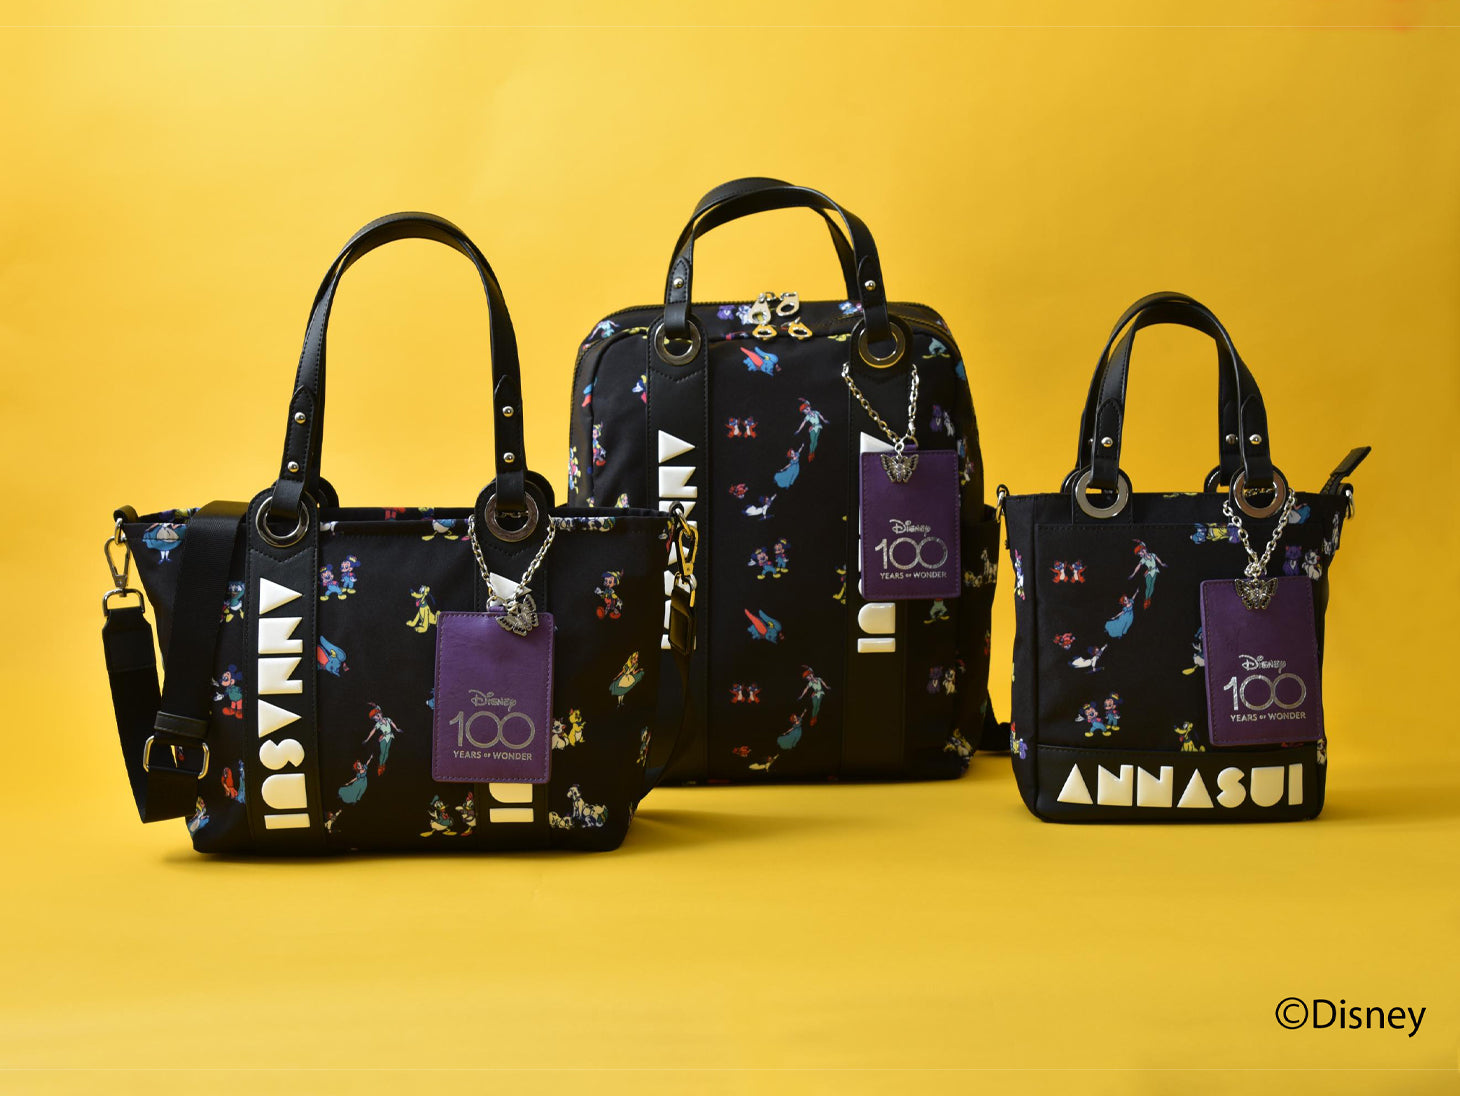 Anna Sui Disney 100 Friends series is here! – アナ スイ ジャパン